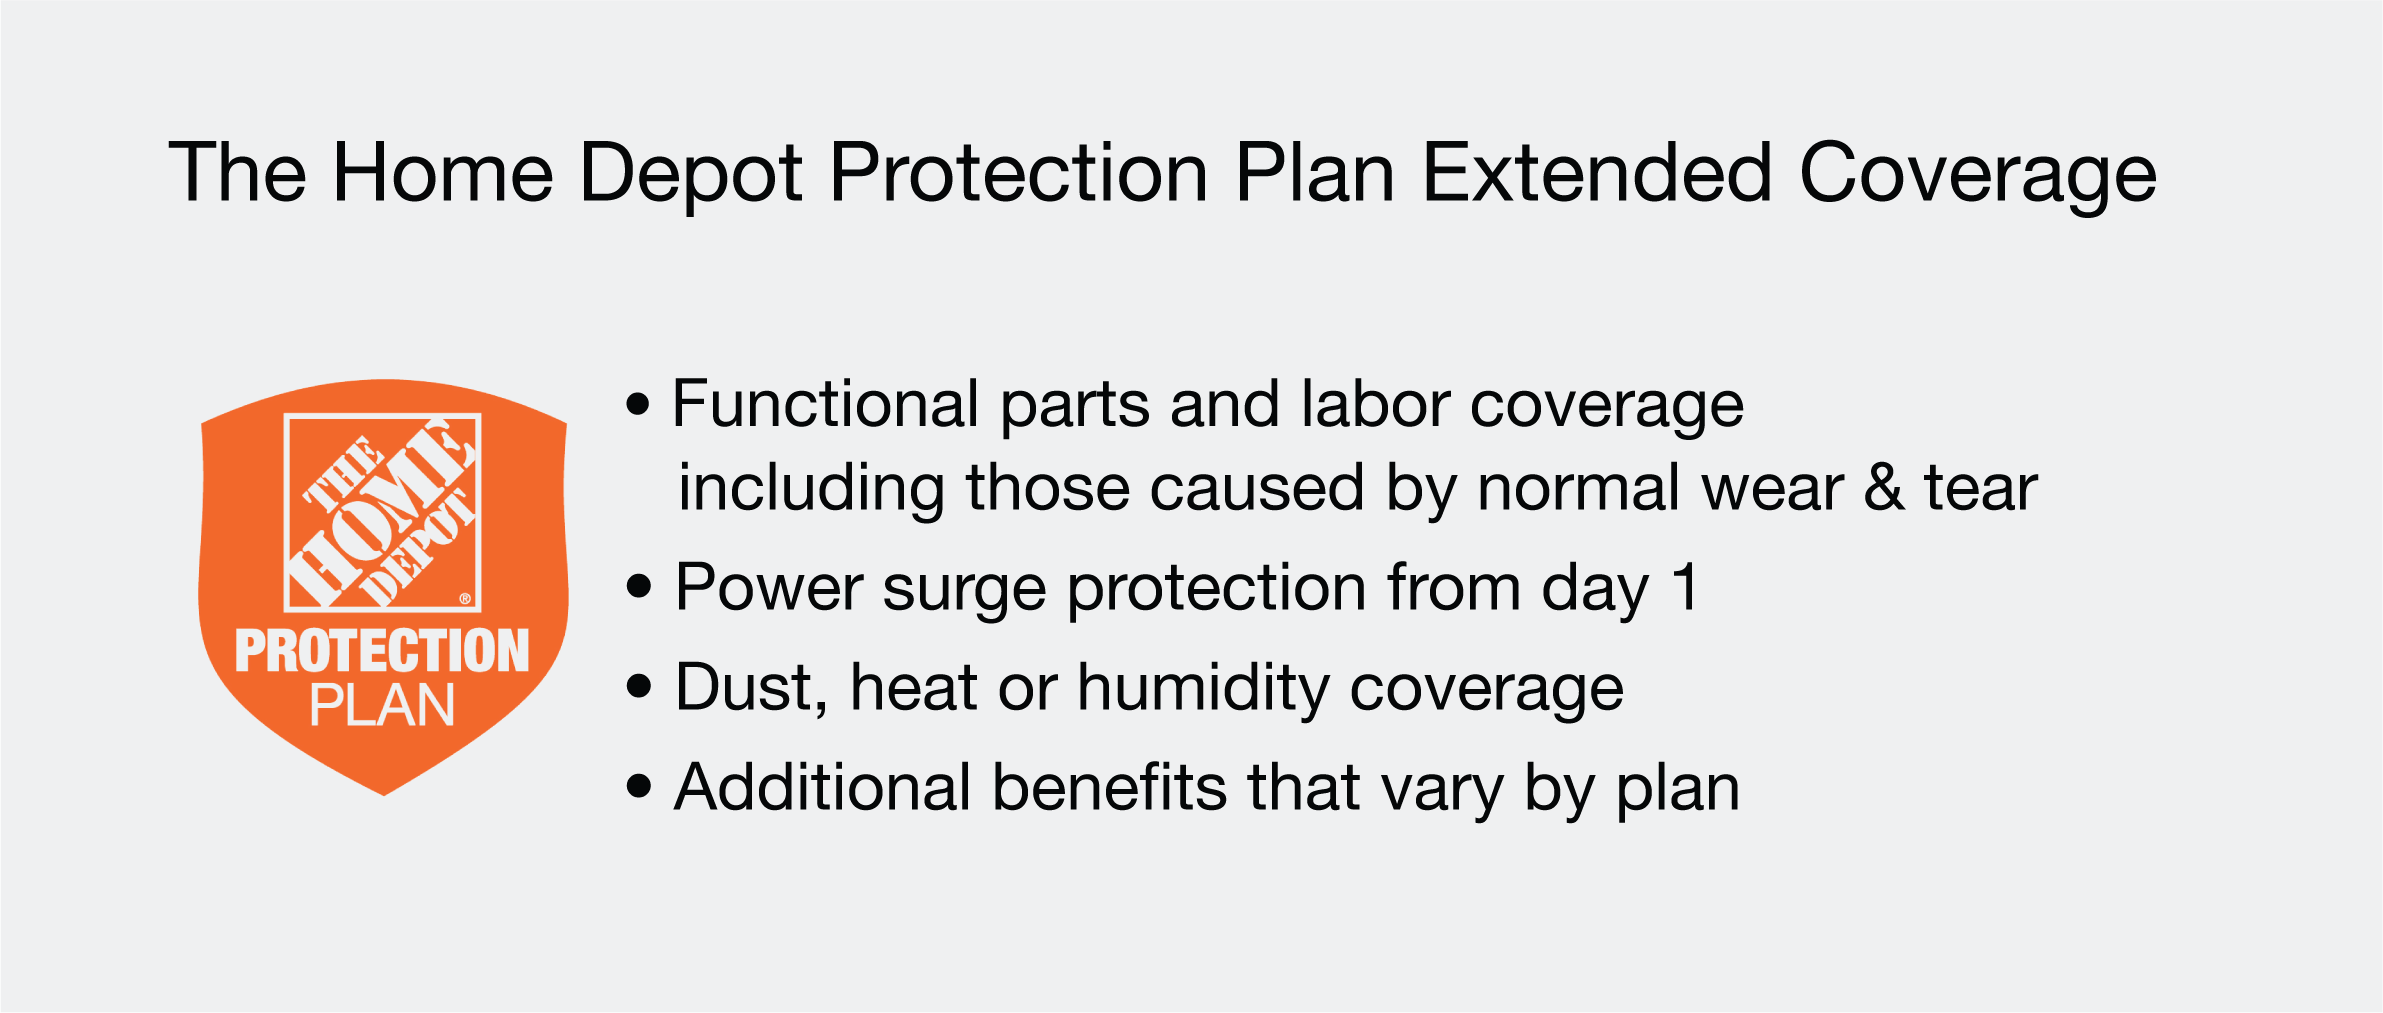 The Home Depot Protection Plans